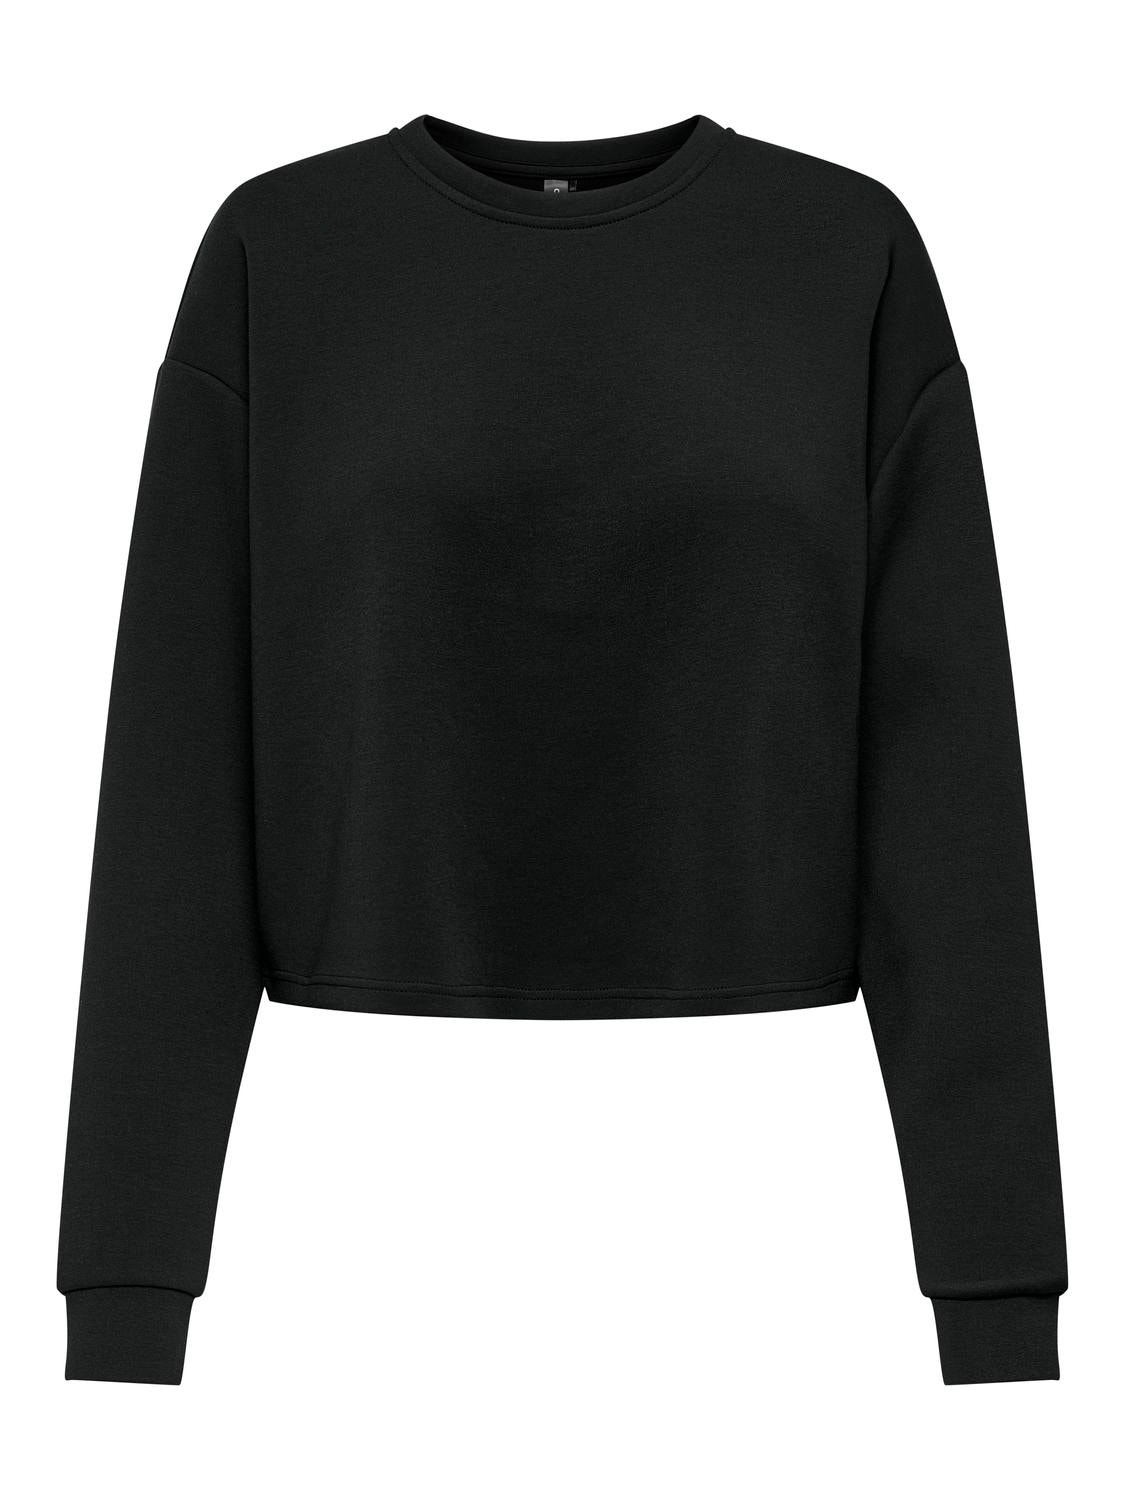 ONLY Cropped o-neck sweat -Black - 15324773